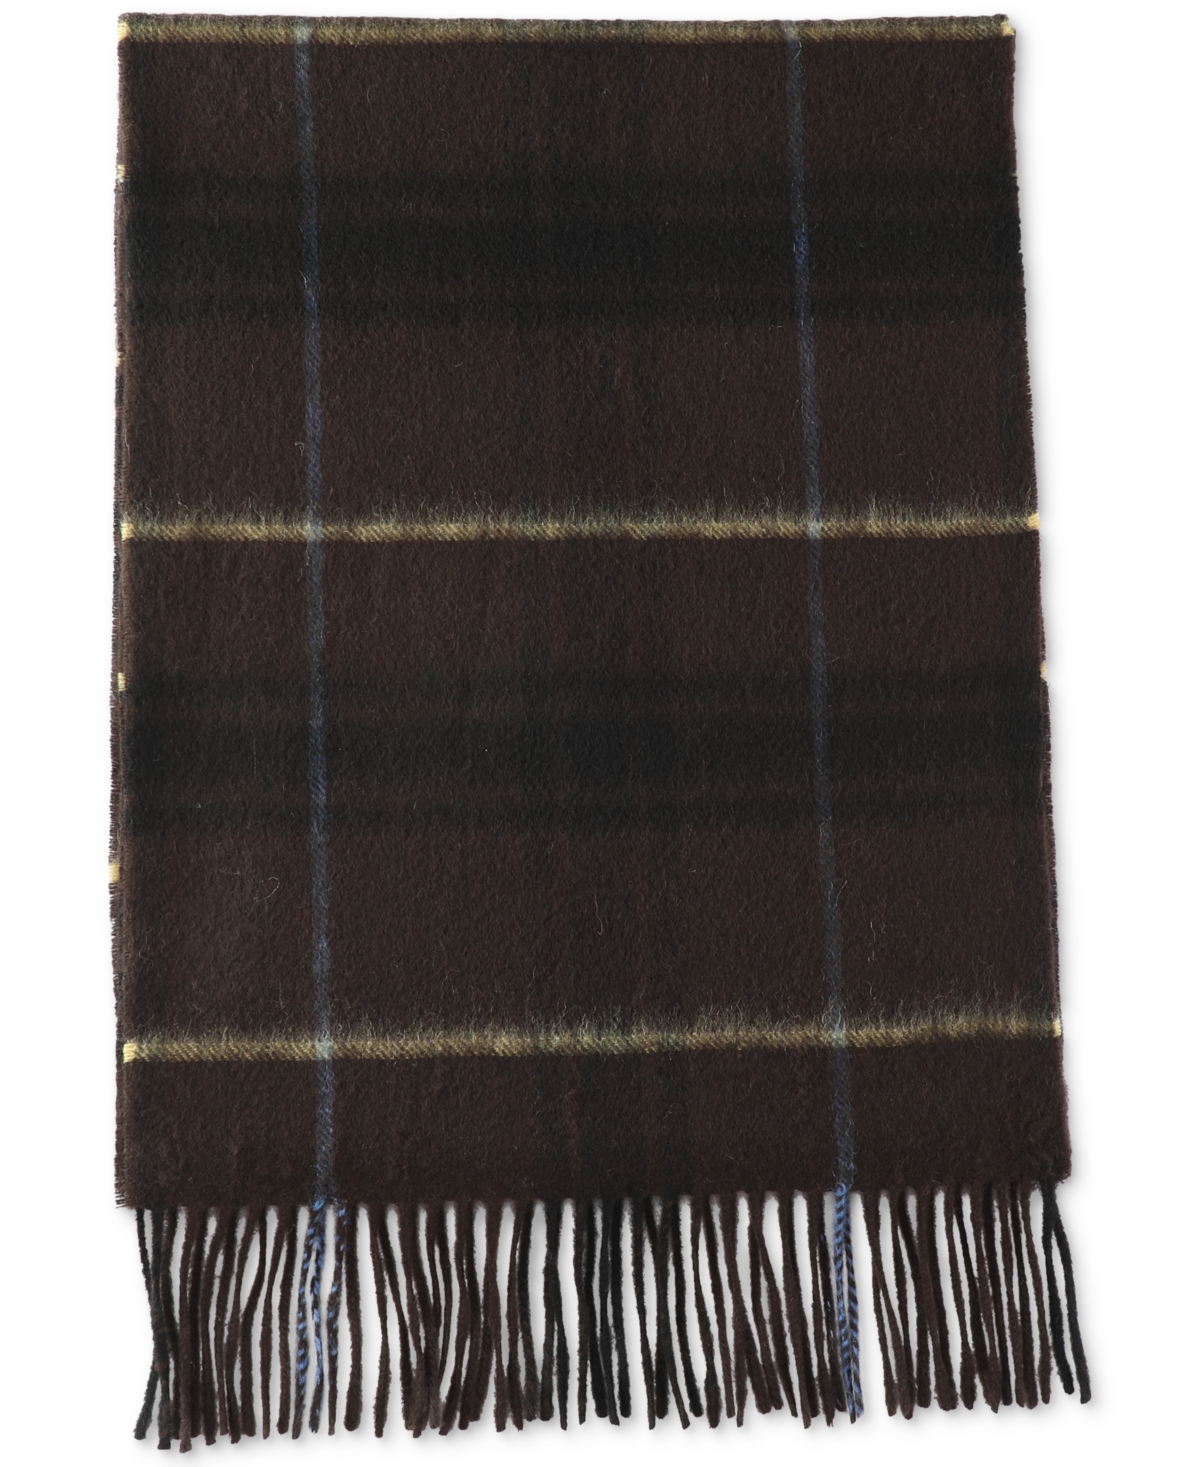 Men's Plaid Cashmere Scarf, Created for Macy's - Brown/yellow